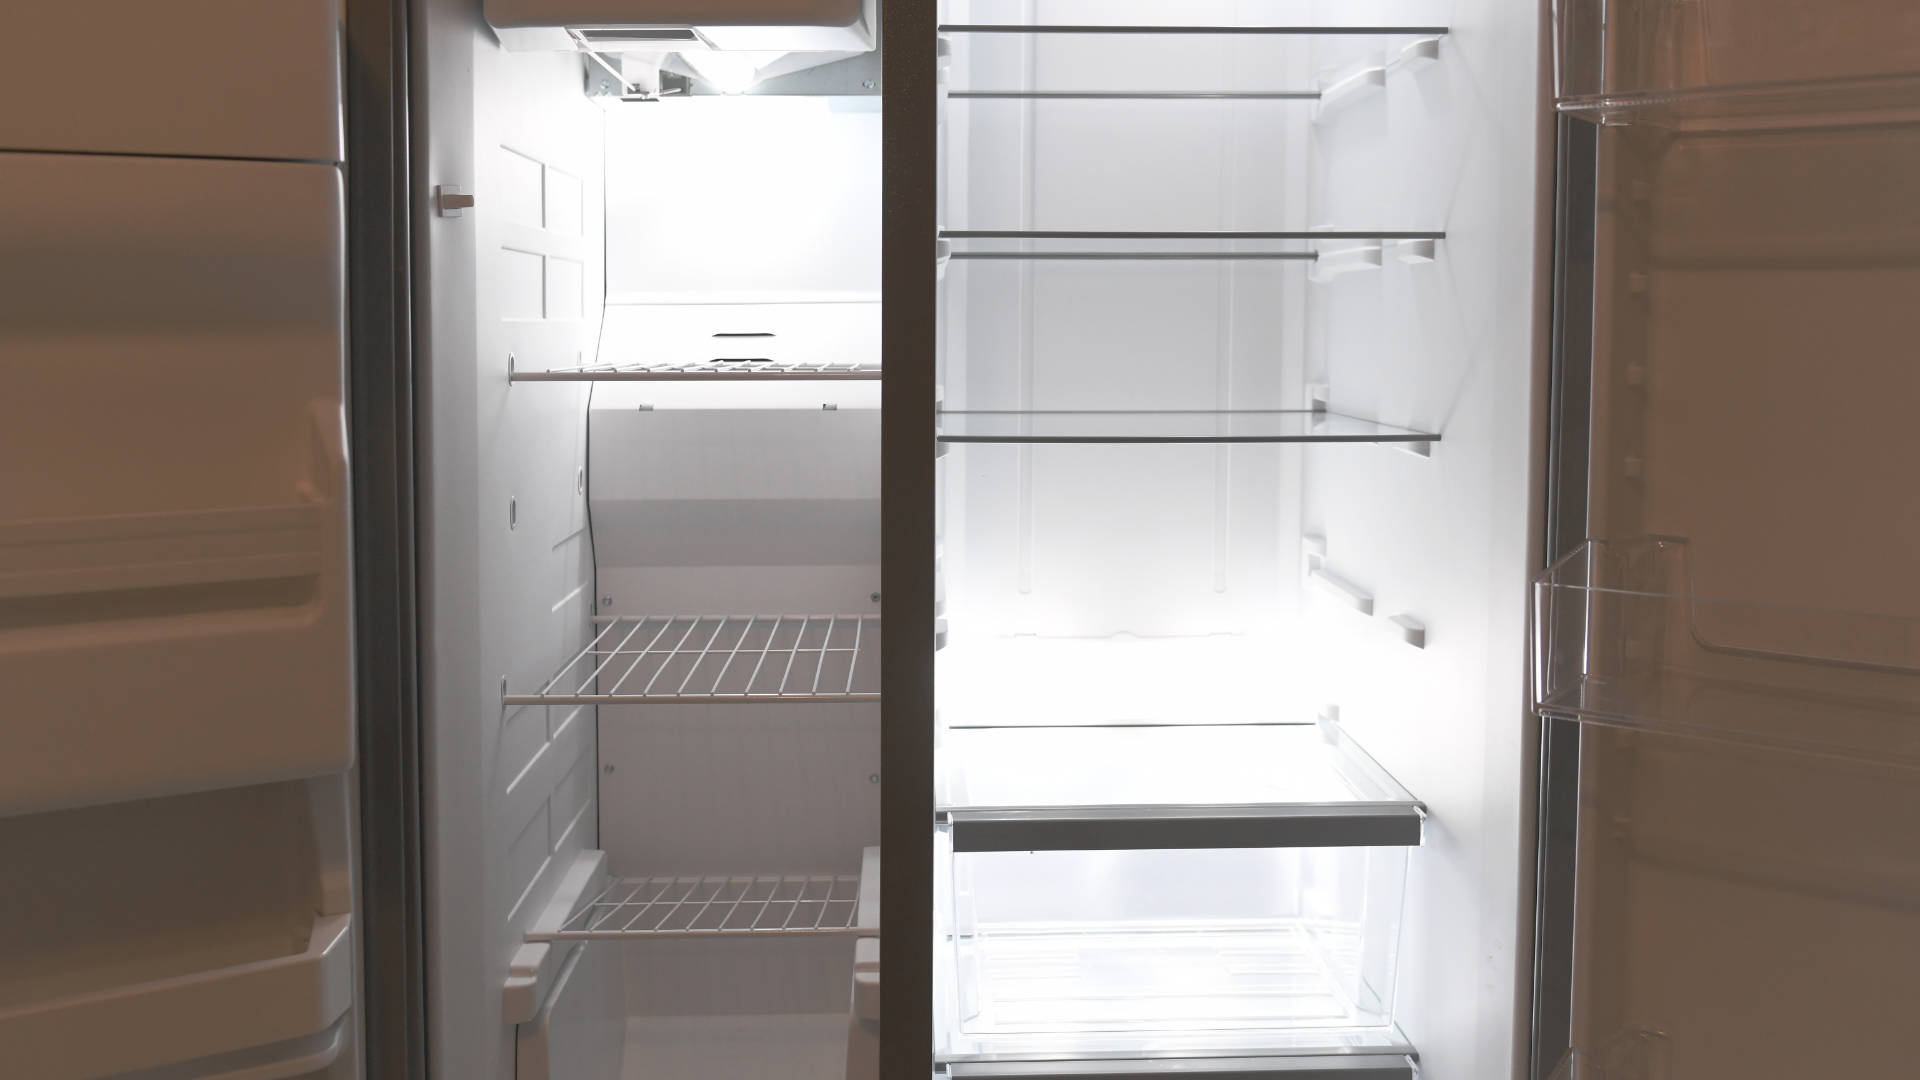 How to Remove Shelves from Whirlpool Freezer